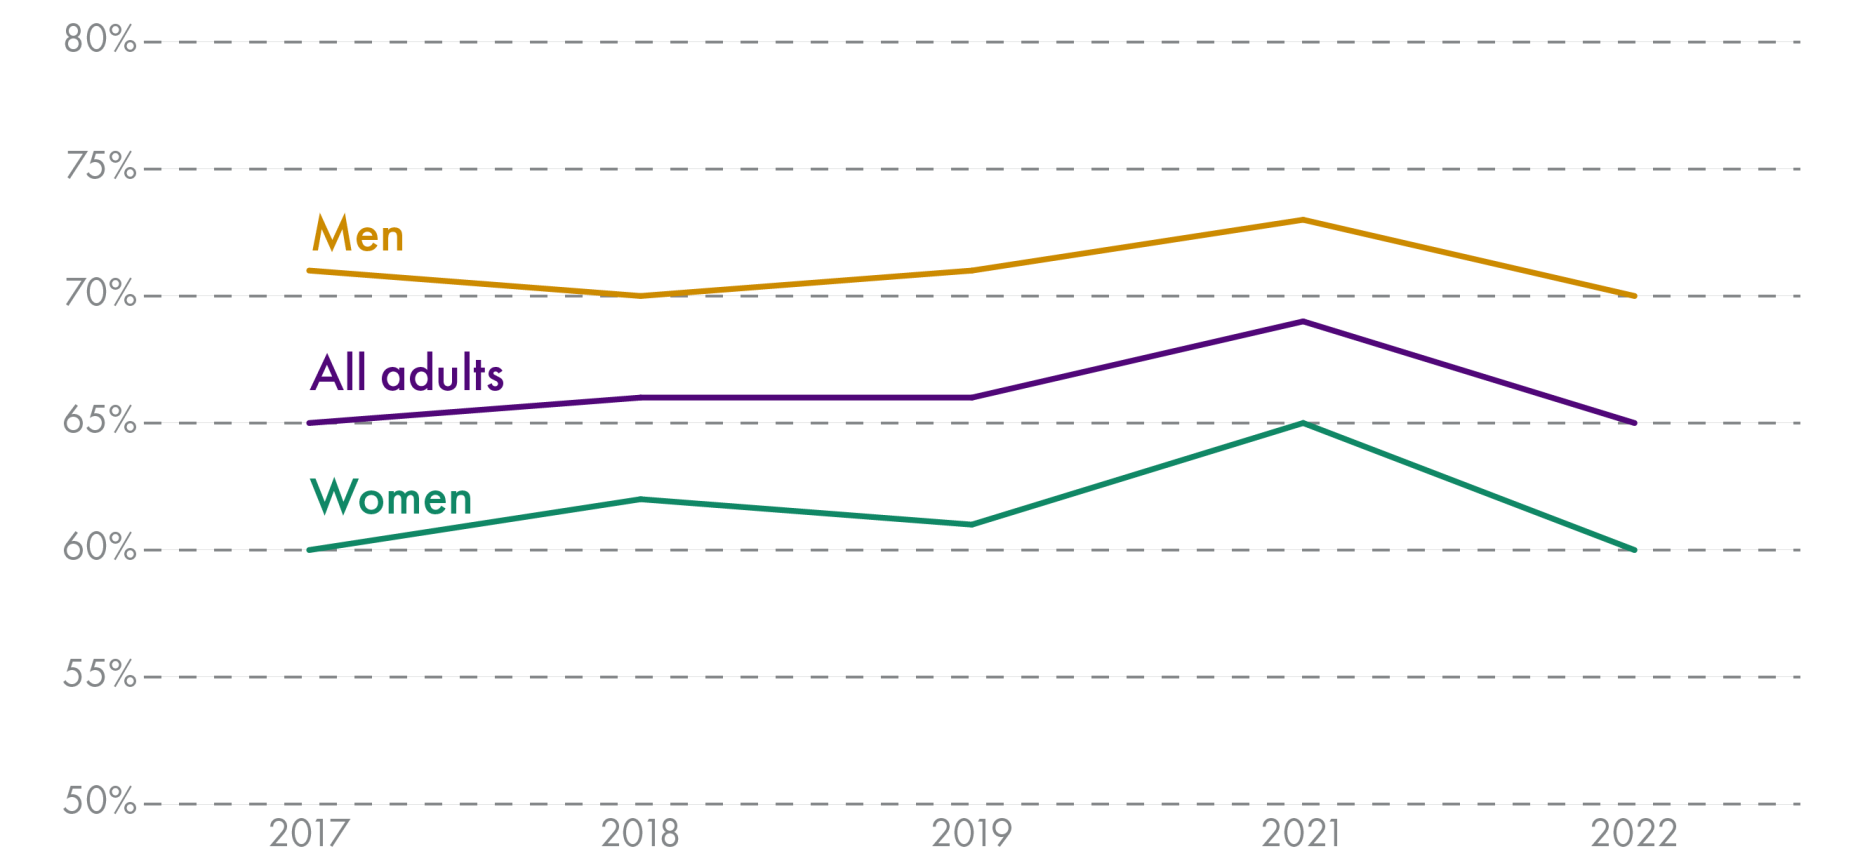 The proportion of adults meeting MVPA guidelines was fairly constant between 2017-2019, peaking in 2020 (men - 73%; women - 65%; all - 69%), before declining again in 2022 (men - 70%; women - 60%; all - 65%).